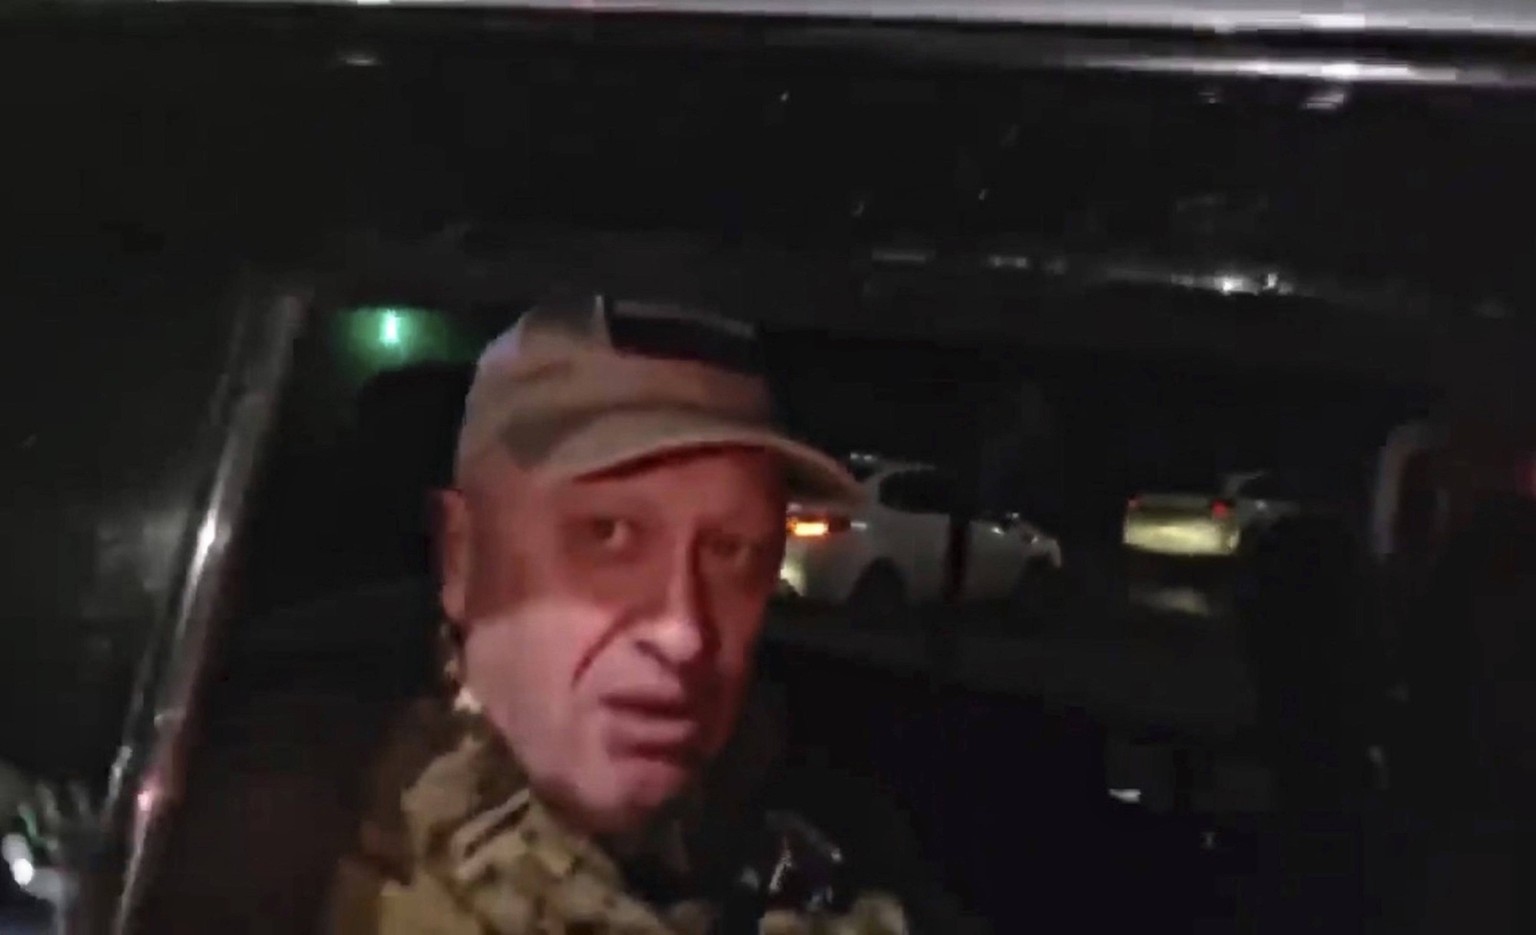 June 26, 2023, Rostov-on-Don, Donetsk Oblast, Ukraine: A screen grab of Russian oligarch Yevgeny Prigozhin, owner of the Wagner Group of mercenaries as he departs by vehicle after reaching an agreemen ...